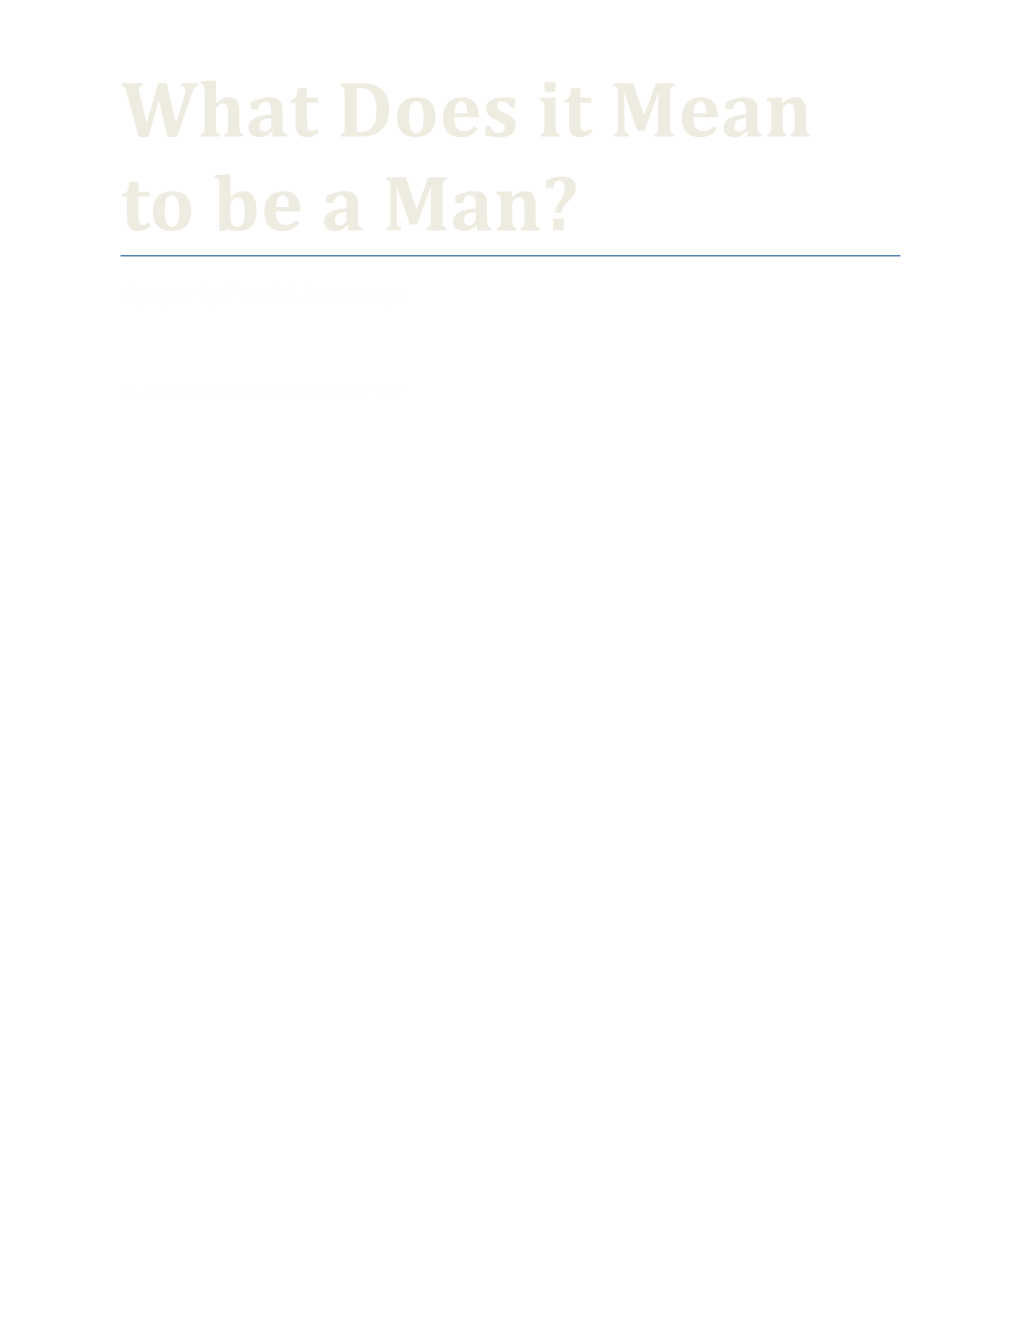 What Does It Mean to Be a Man?